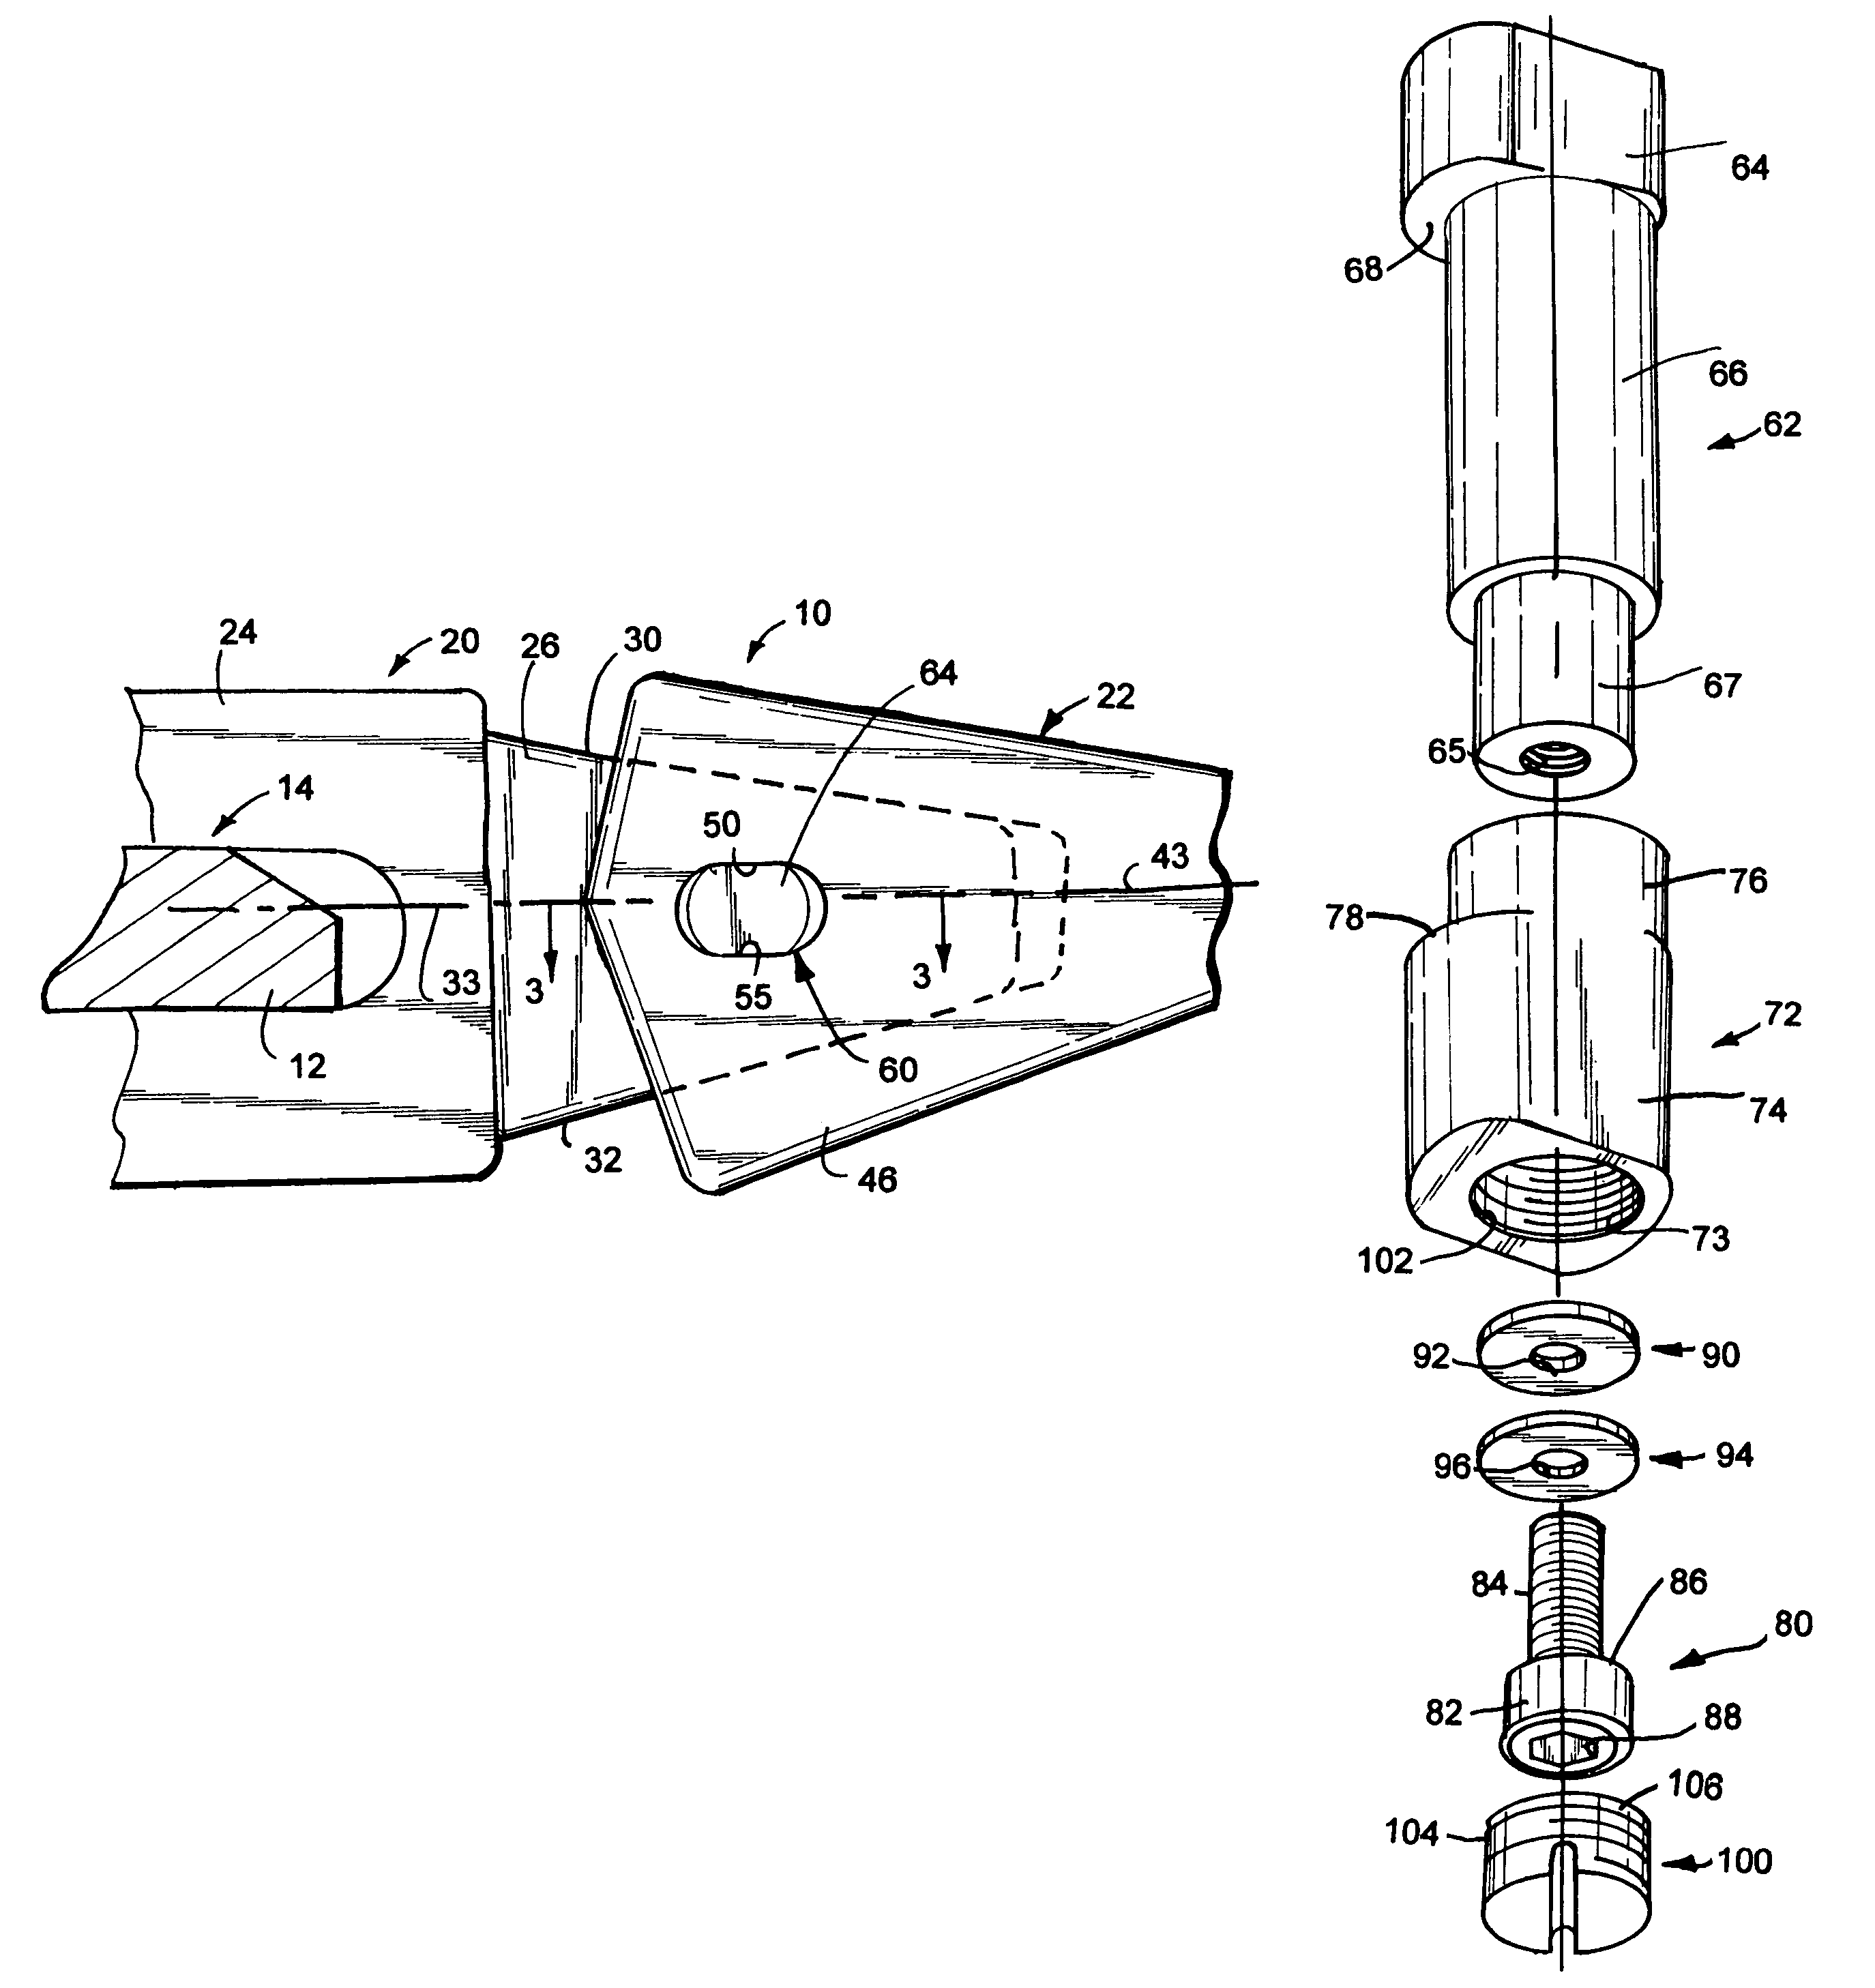 Pin assembly for a two-part ground engaging tooth system and method for connecting components of a two-part ground engaging tooth system to each other